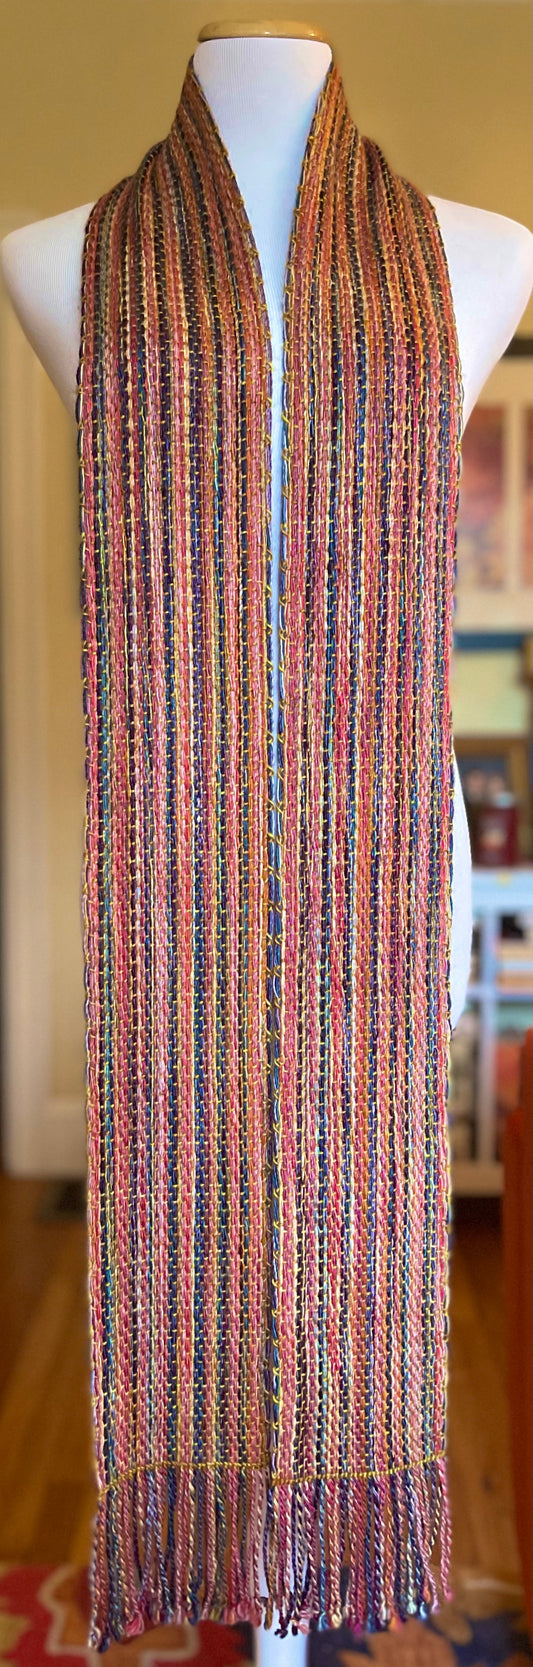 Skinny Scarf Handwoven by The Village Weaver